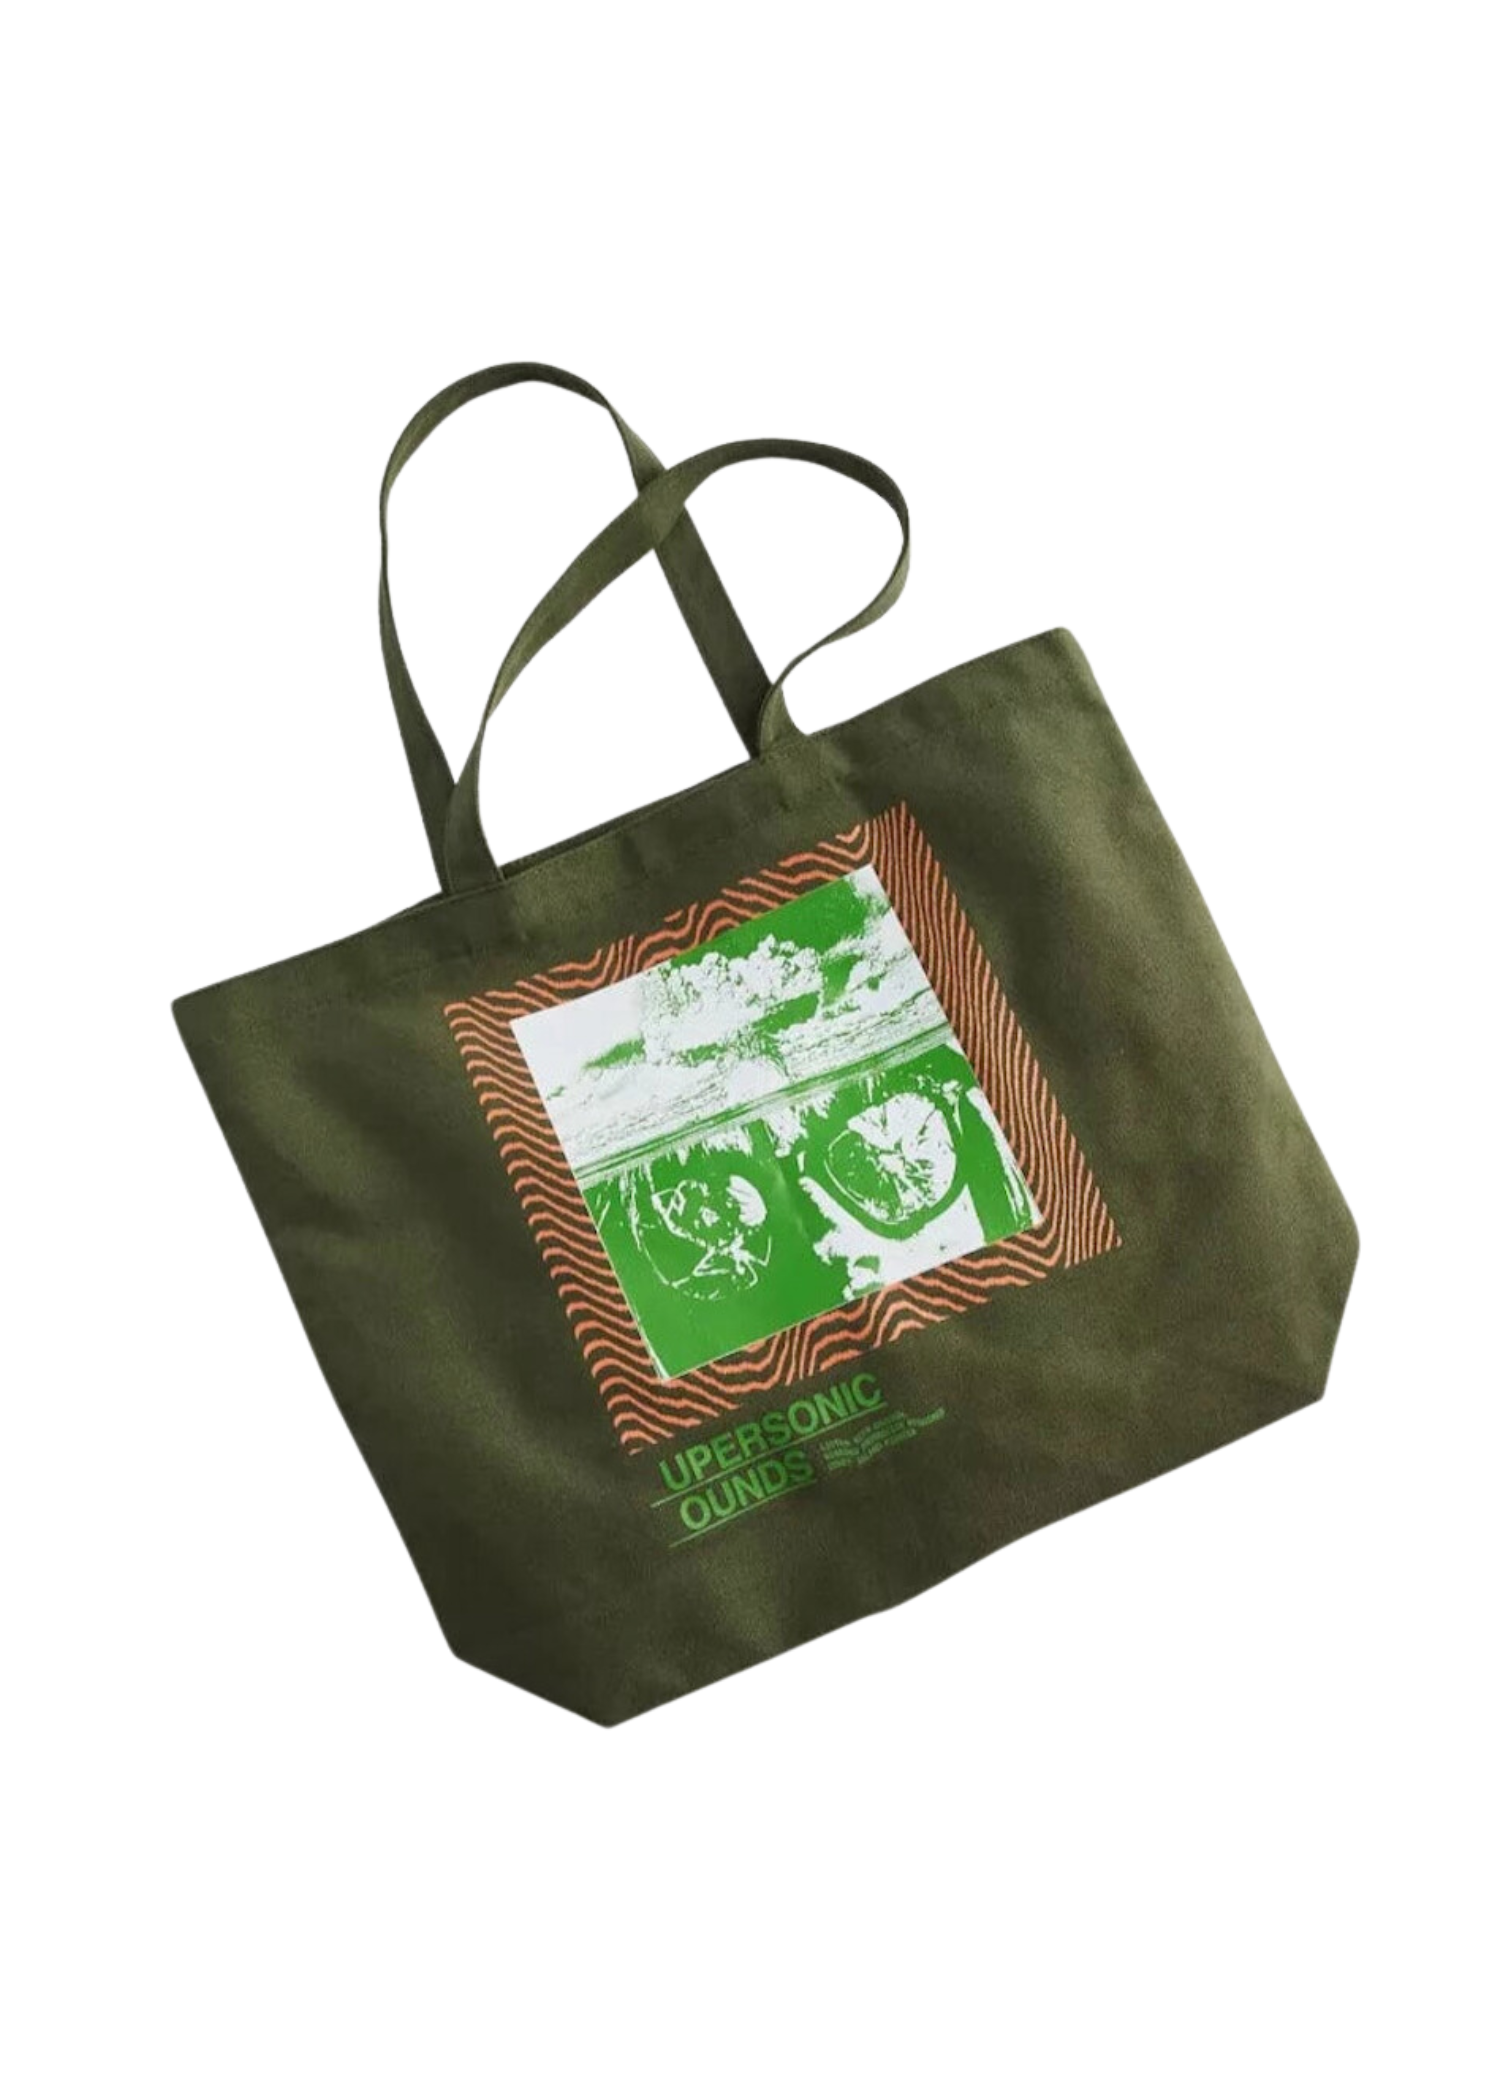 Supersonic Sounds Tote Bag